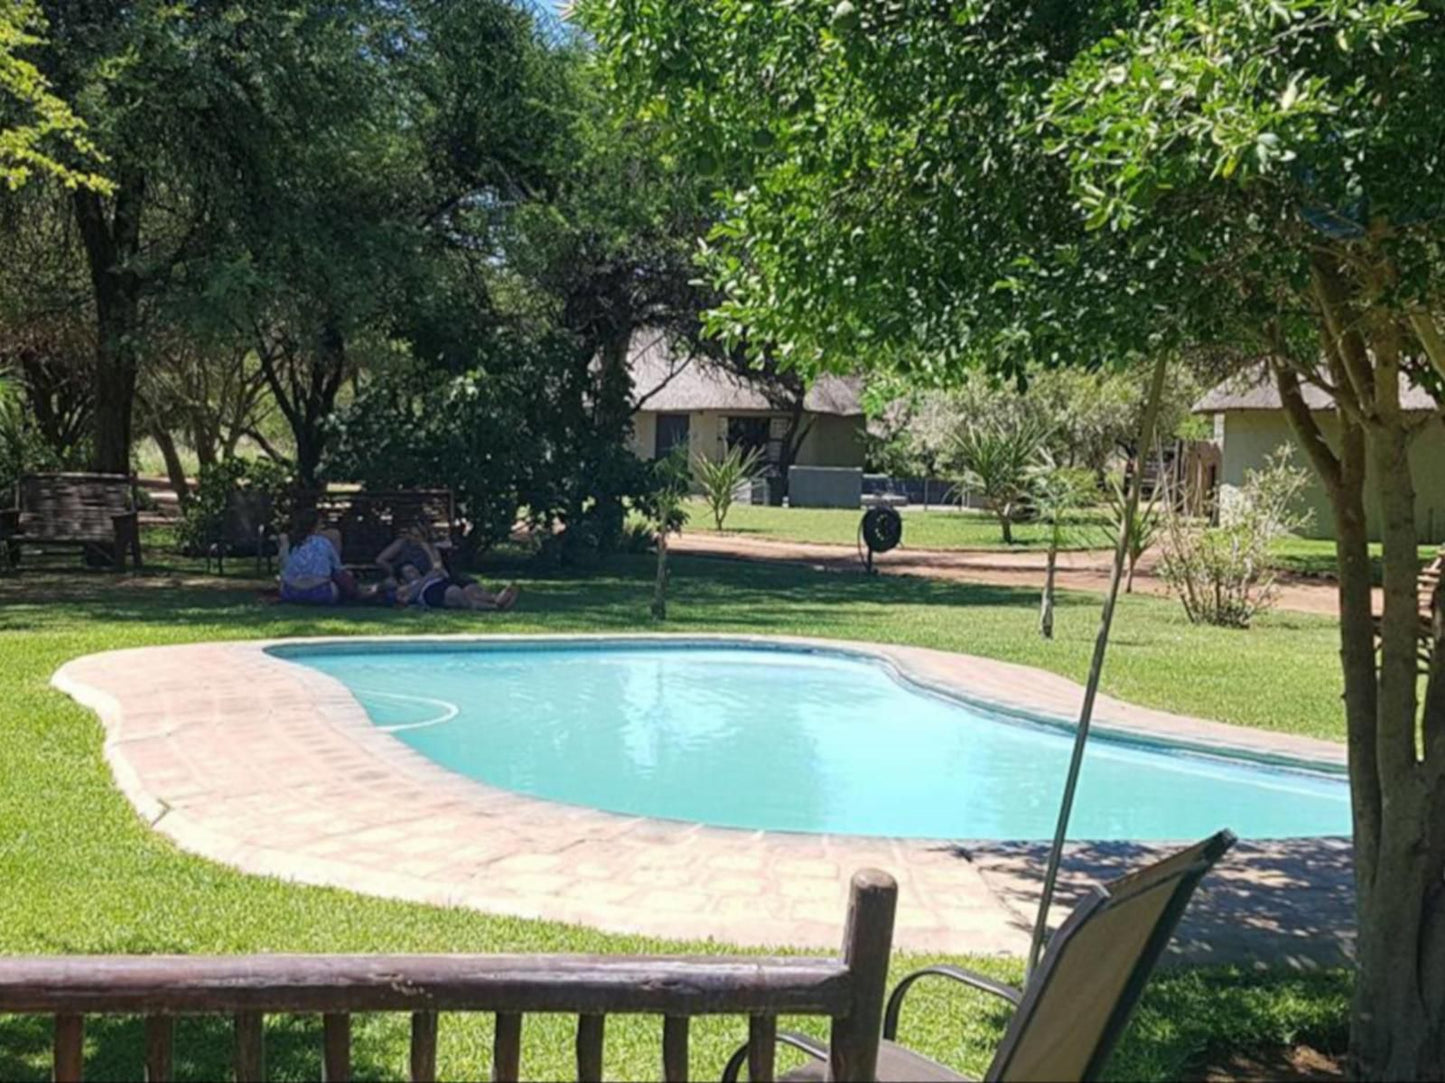 Grootgeluk Bush Camp Mookgopong Naboomspruit Limpopo Province South Africa Garden, Nature, Plant, Swimming Pool